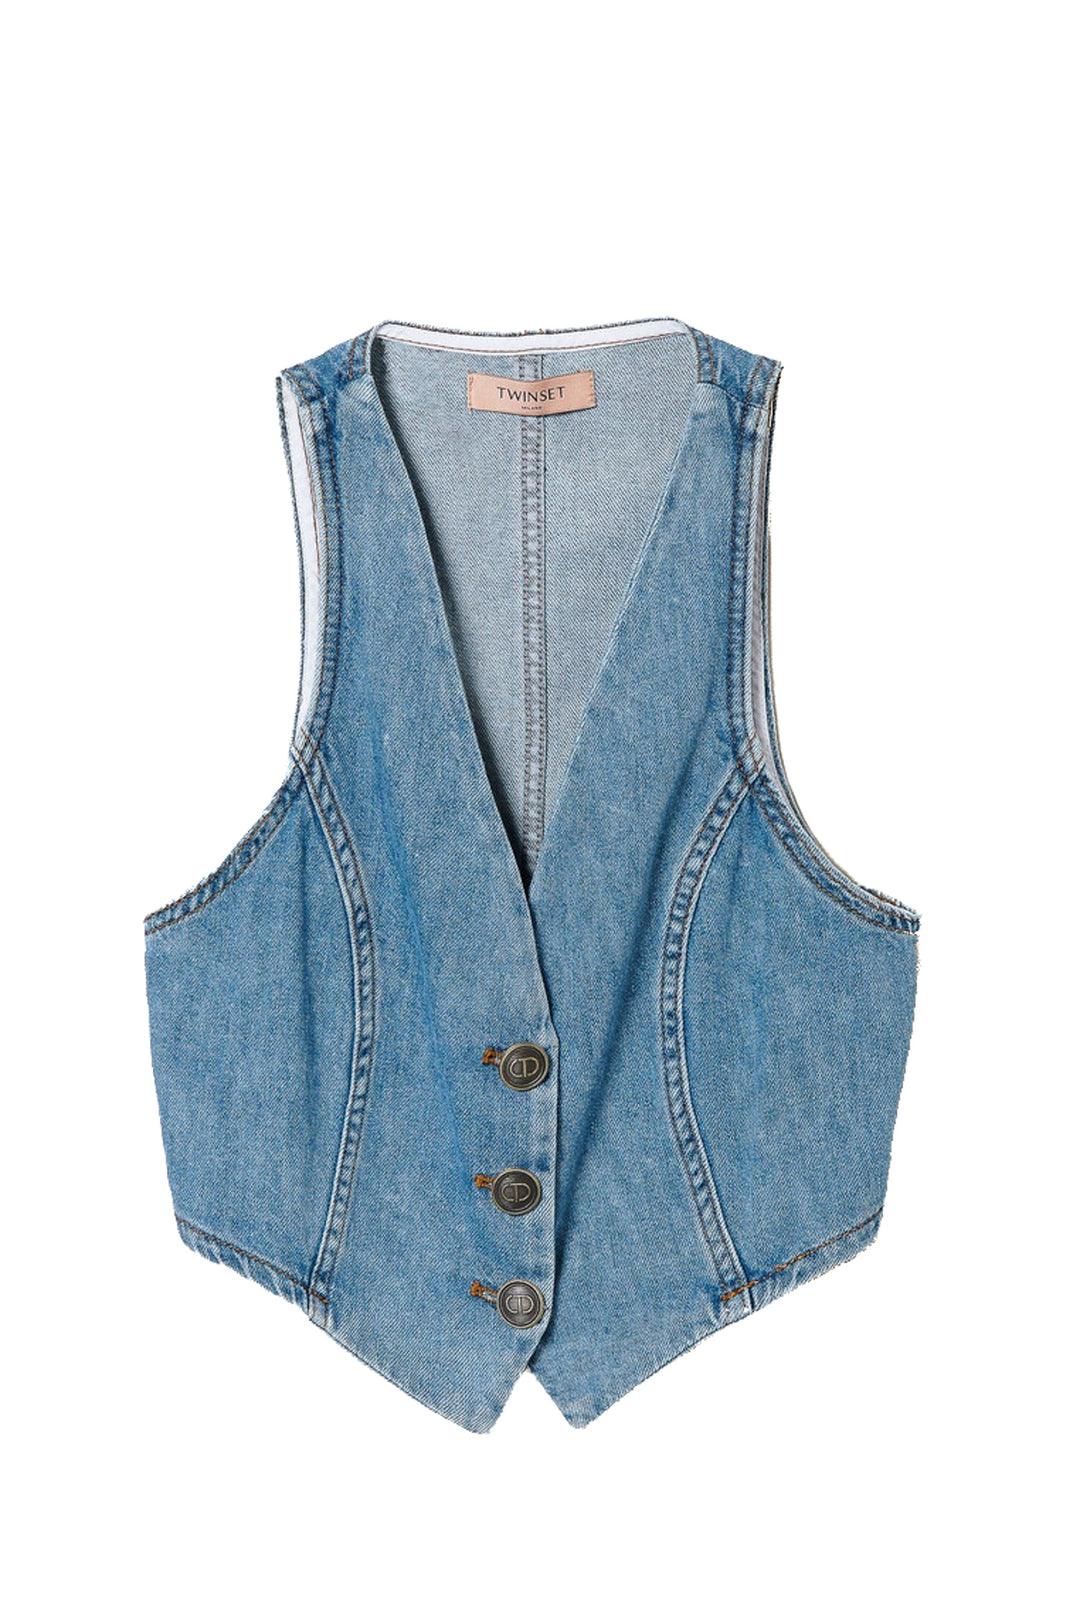 TWINSET Gilet fitted in jeans - Mancinelli 1954